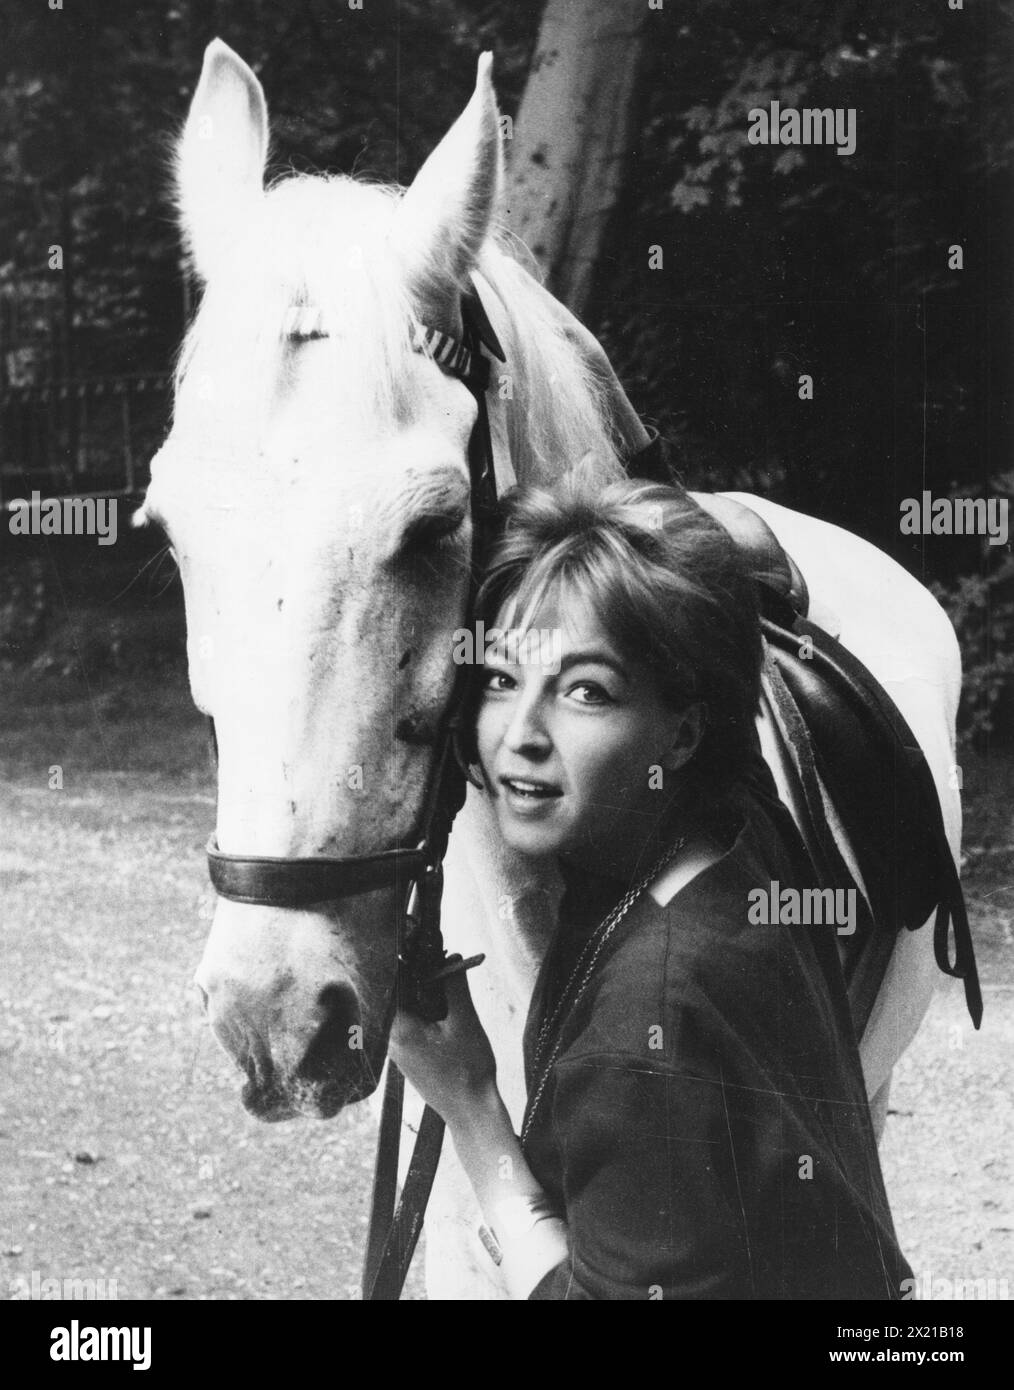 Wangenheim, Karin von, 29.10.1937 - 16.4.2019, German artist (painter) and actress, with horse, 1960s, ADDITIONAL-RIGHTS-CLEARANCE-INFO-NOT-AVAILABLE Stock Photo